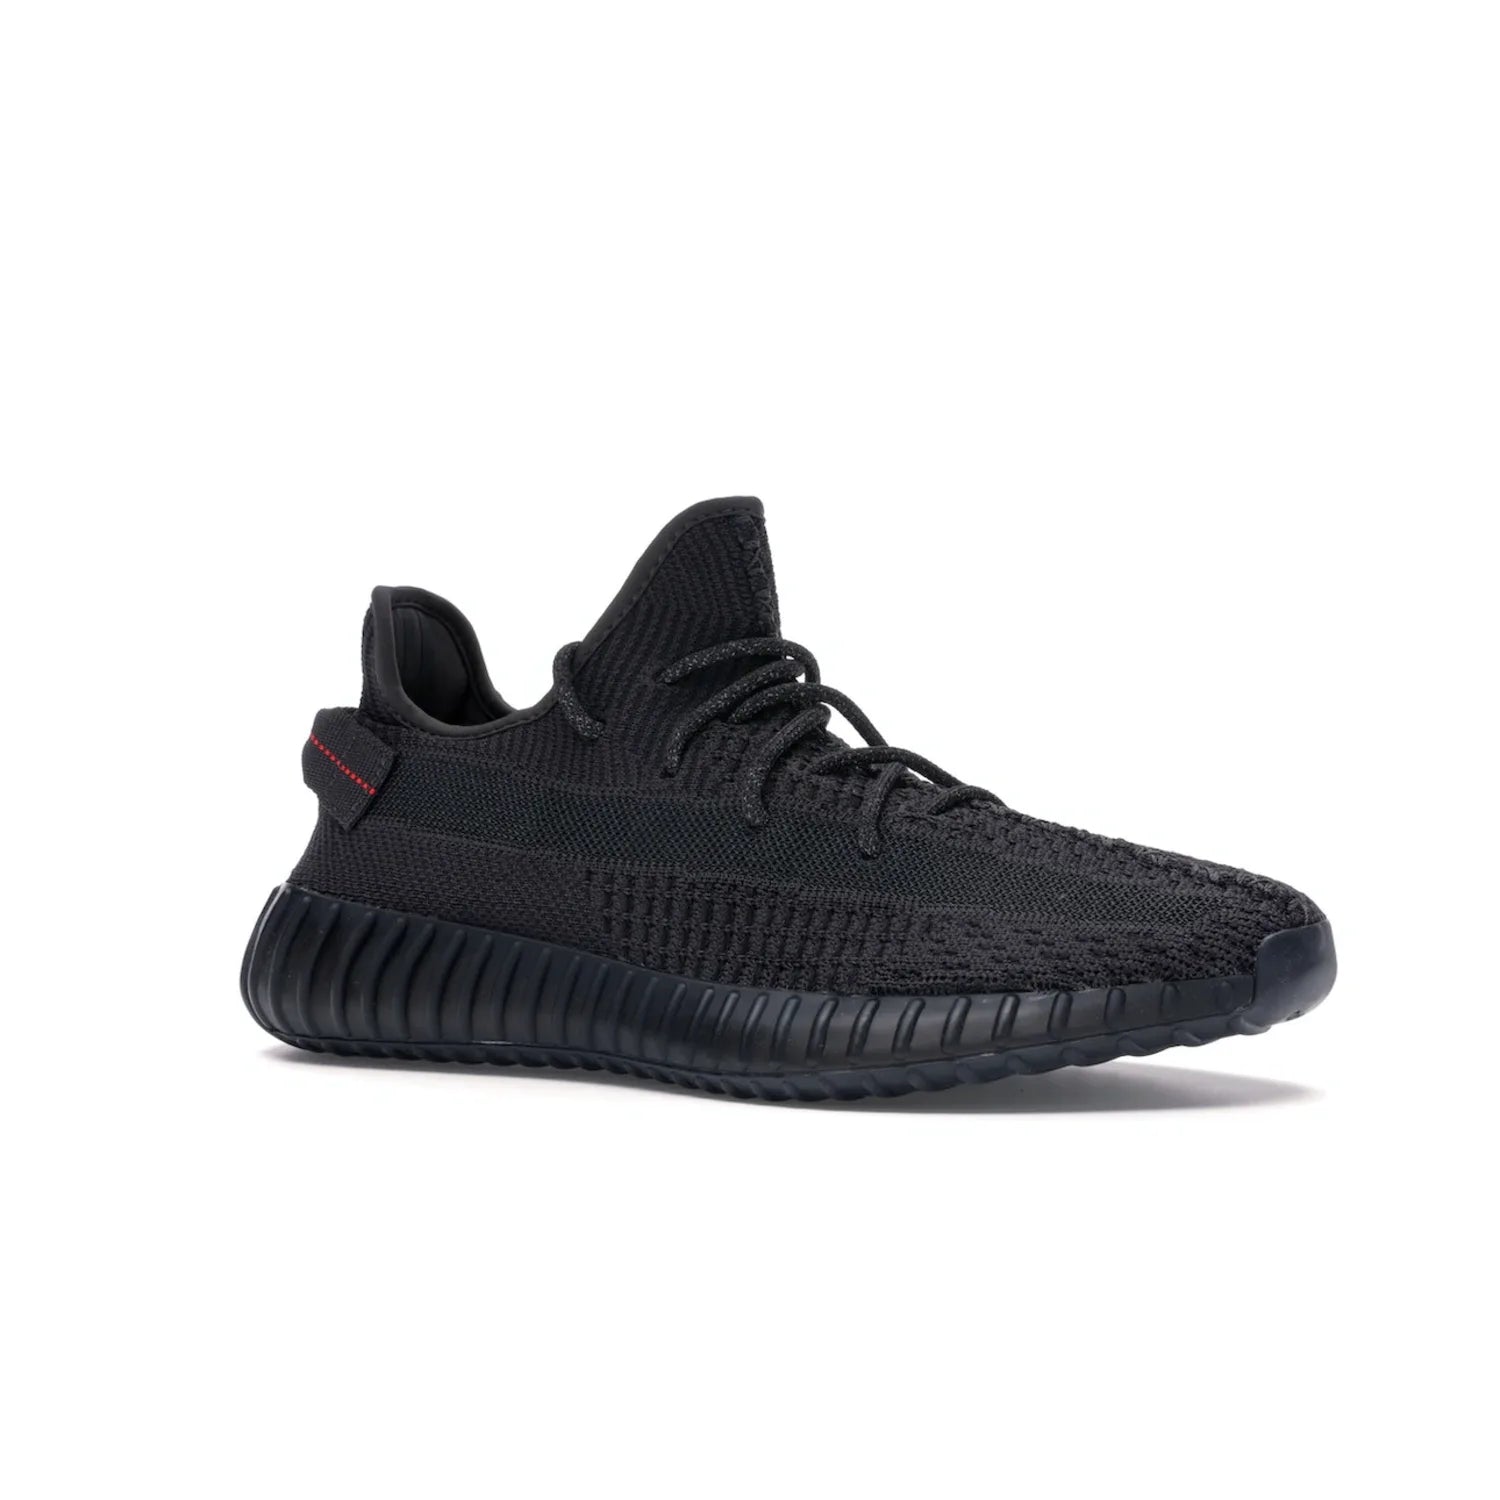 adidas Yeezy Boost 350 V2 Black (Non-Reflective) - Image 4 - Only at www.BallersClubKickz.com - A timeless, sleek silhouette crafted from quality materials. The adidas Yeezy Boost 350 V2 Black (Non-Reflective) brings style and sophistication. Get yours now!